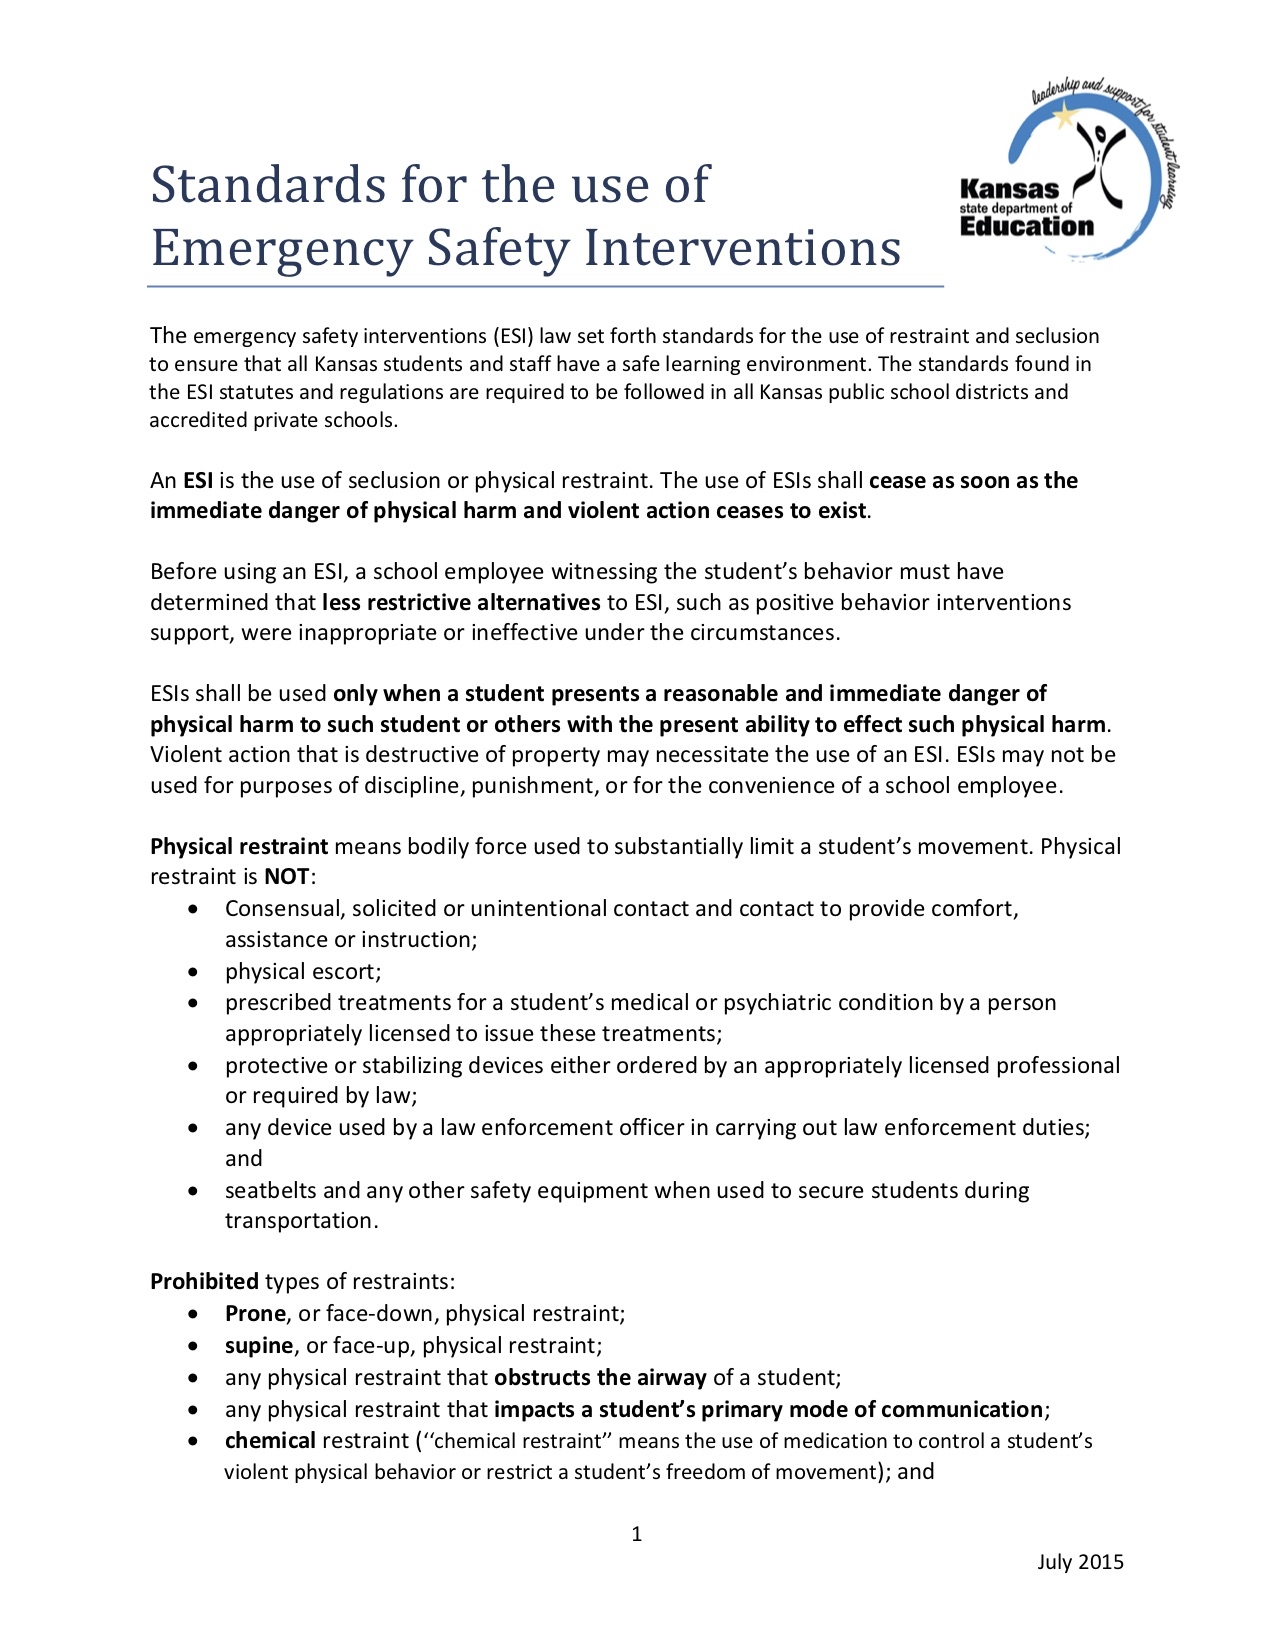 Standards for the use of Emergency Safety Interventions